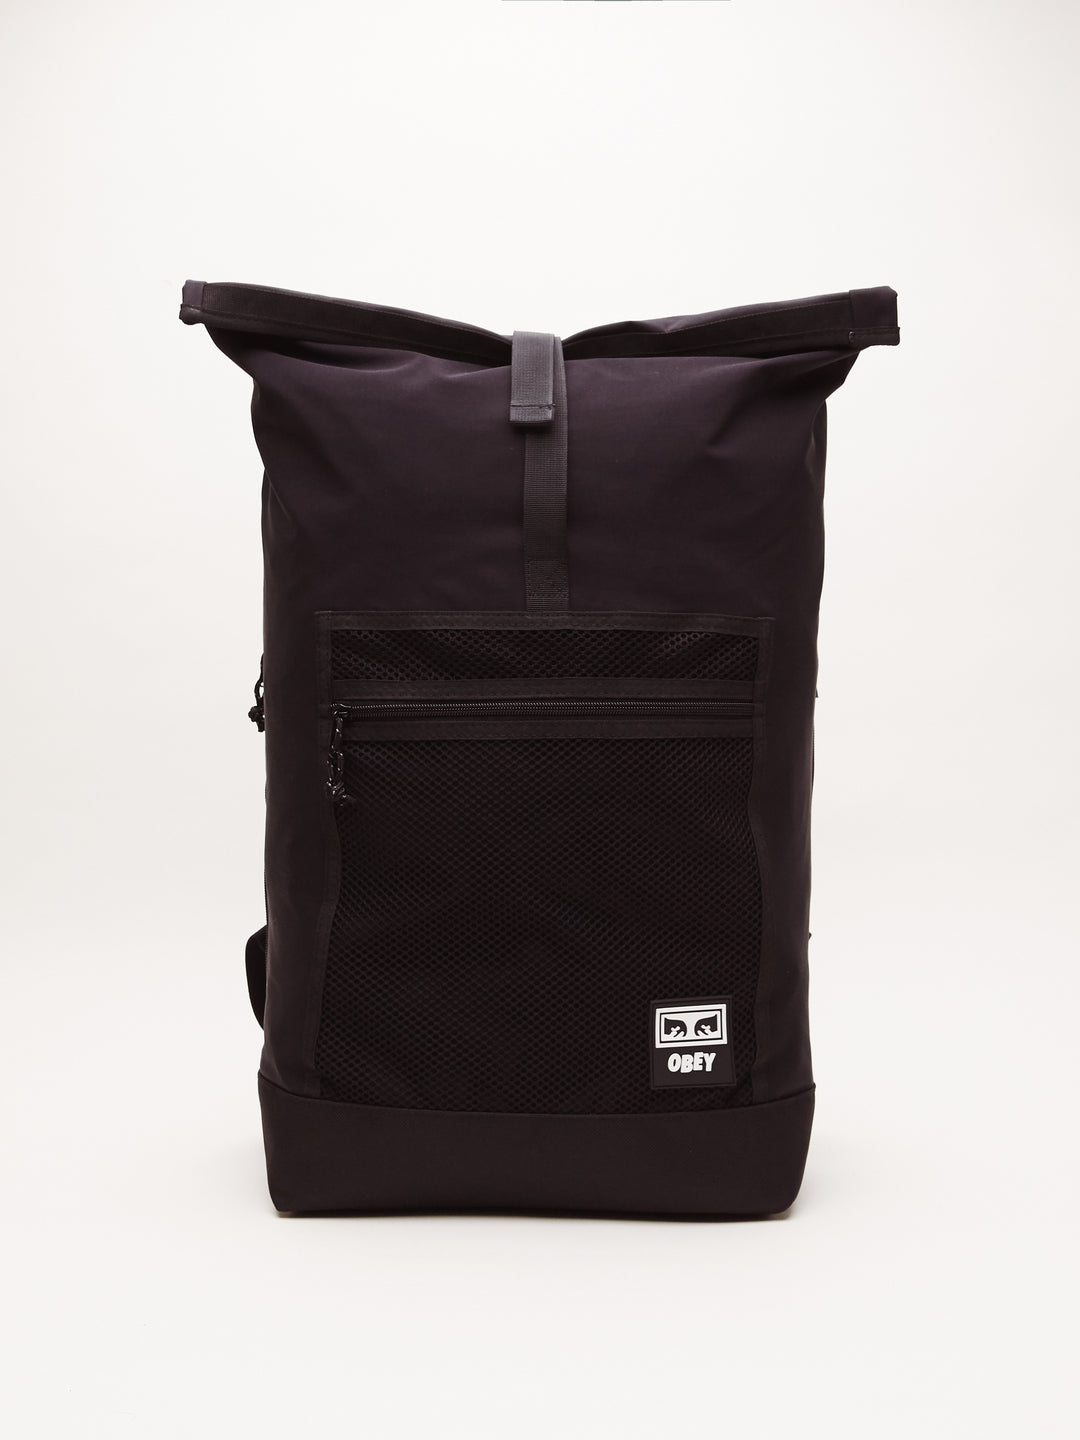 Conditions Rolltop Bag / Black - Main Image Number 1 of 3